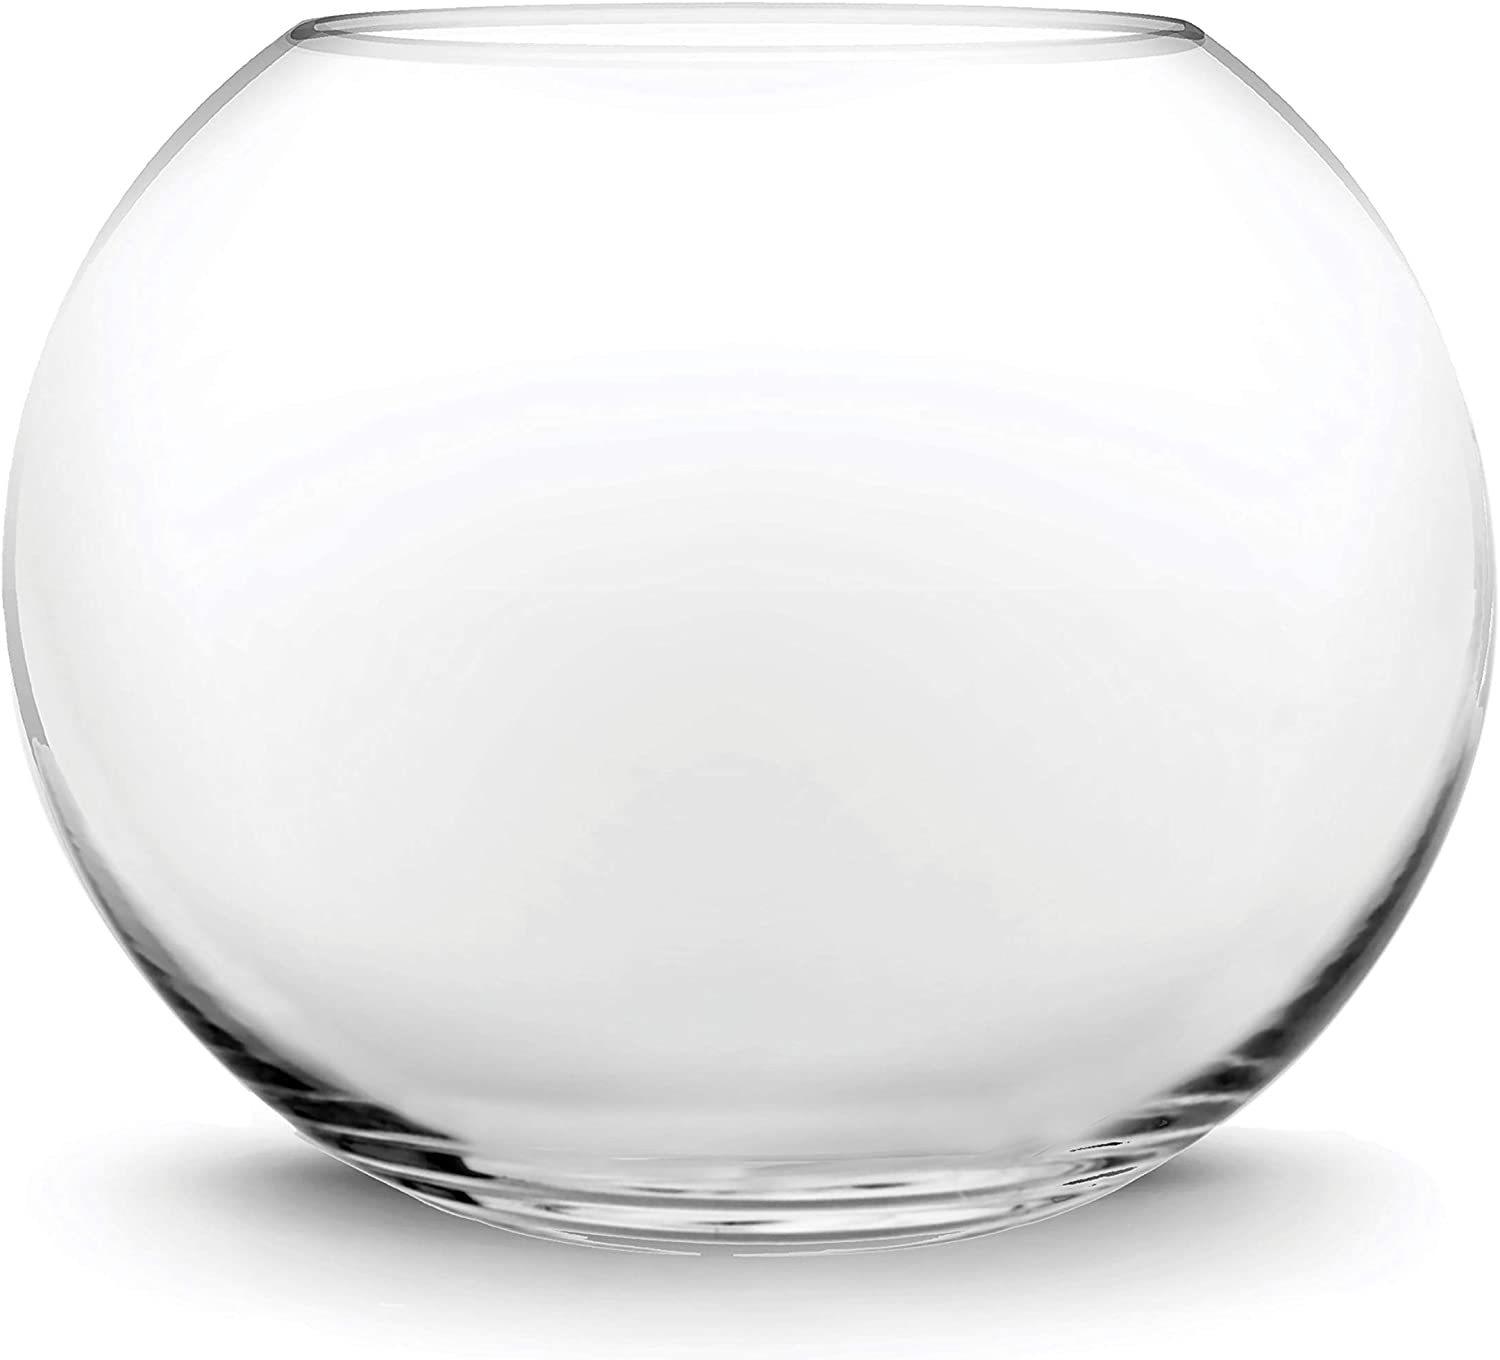 Cys Excel Glass Bubble Bowl (H-4.5" W-5.5", Approx. 1/4 Gal.) | Multiple Size - $37.99